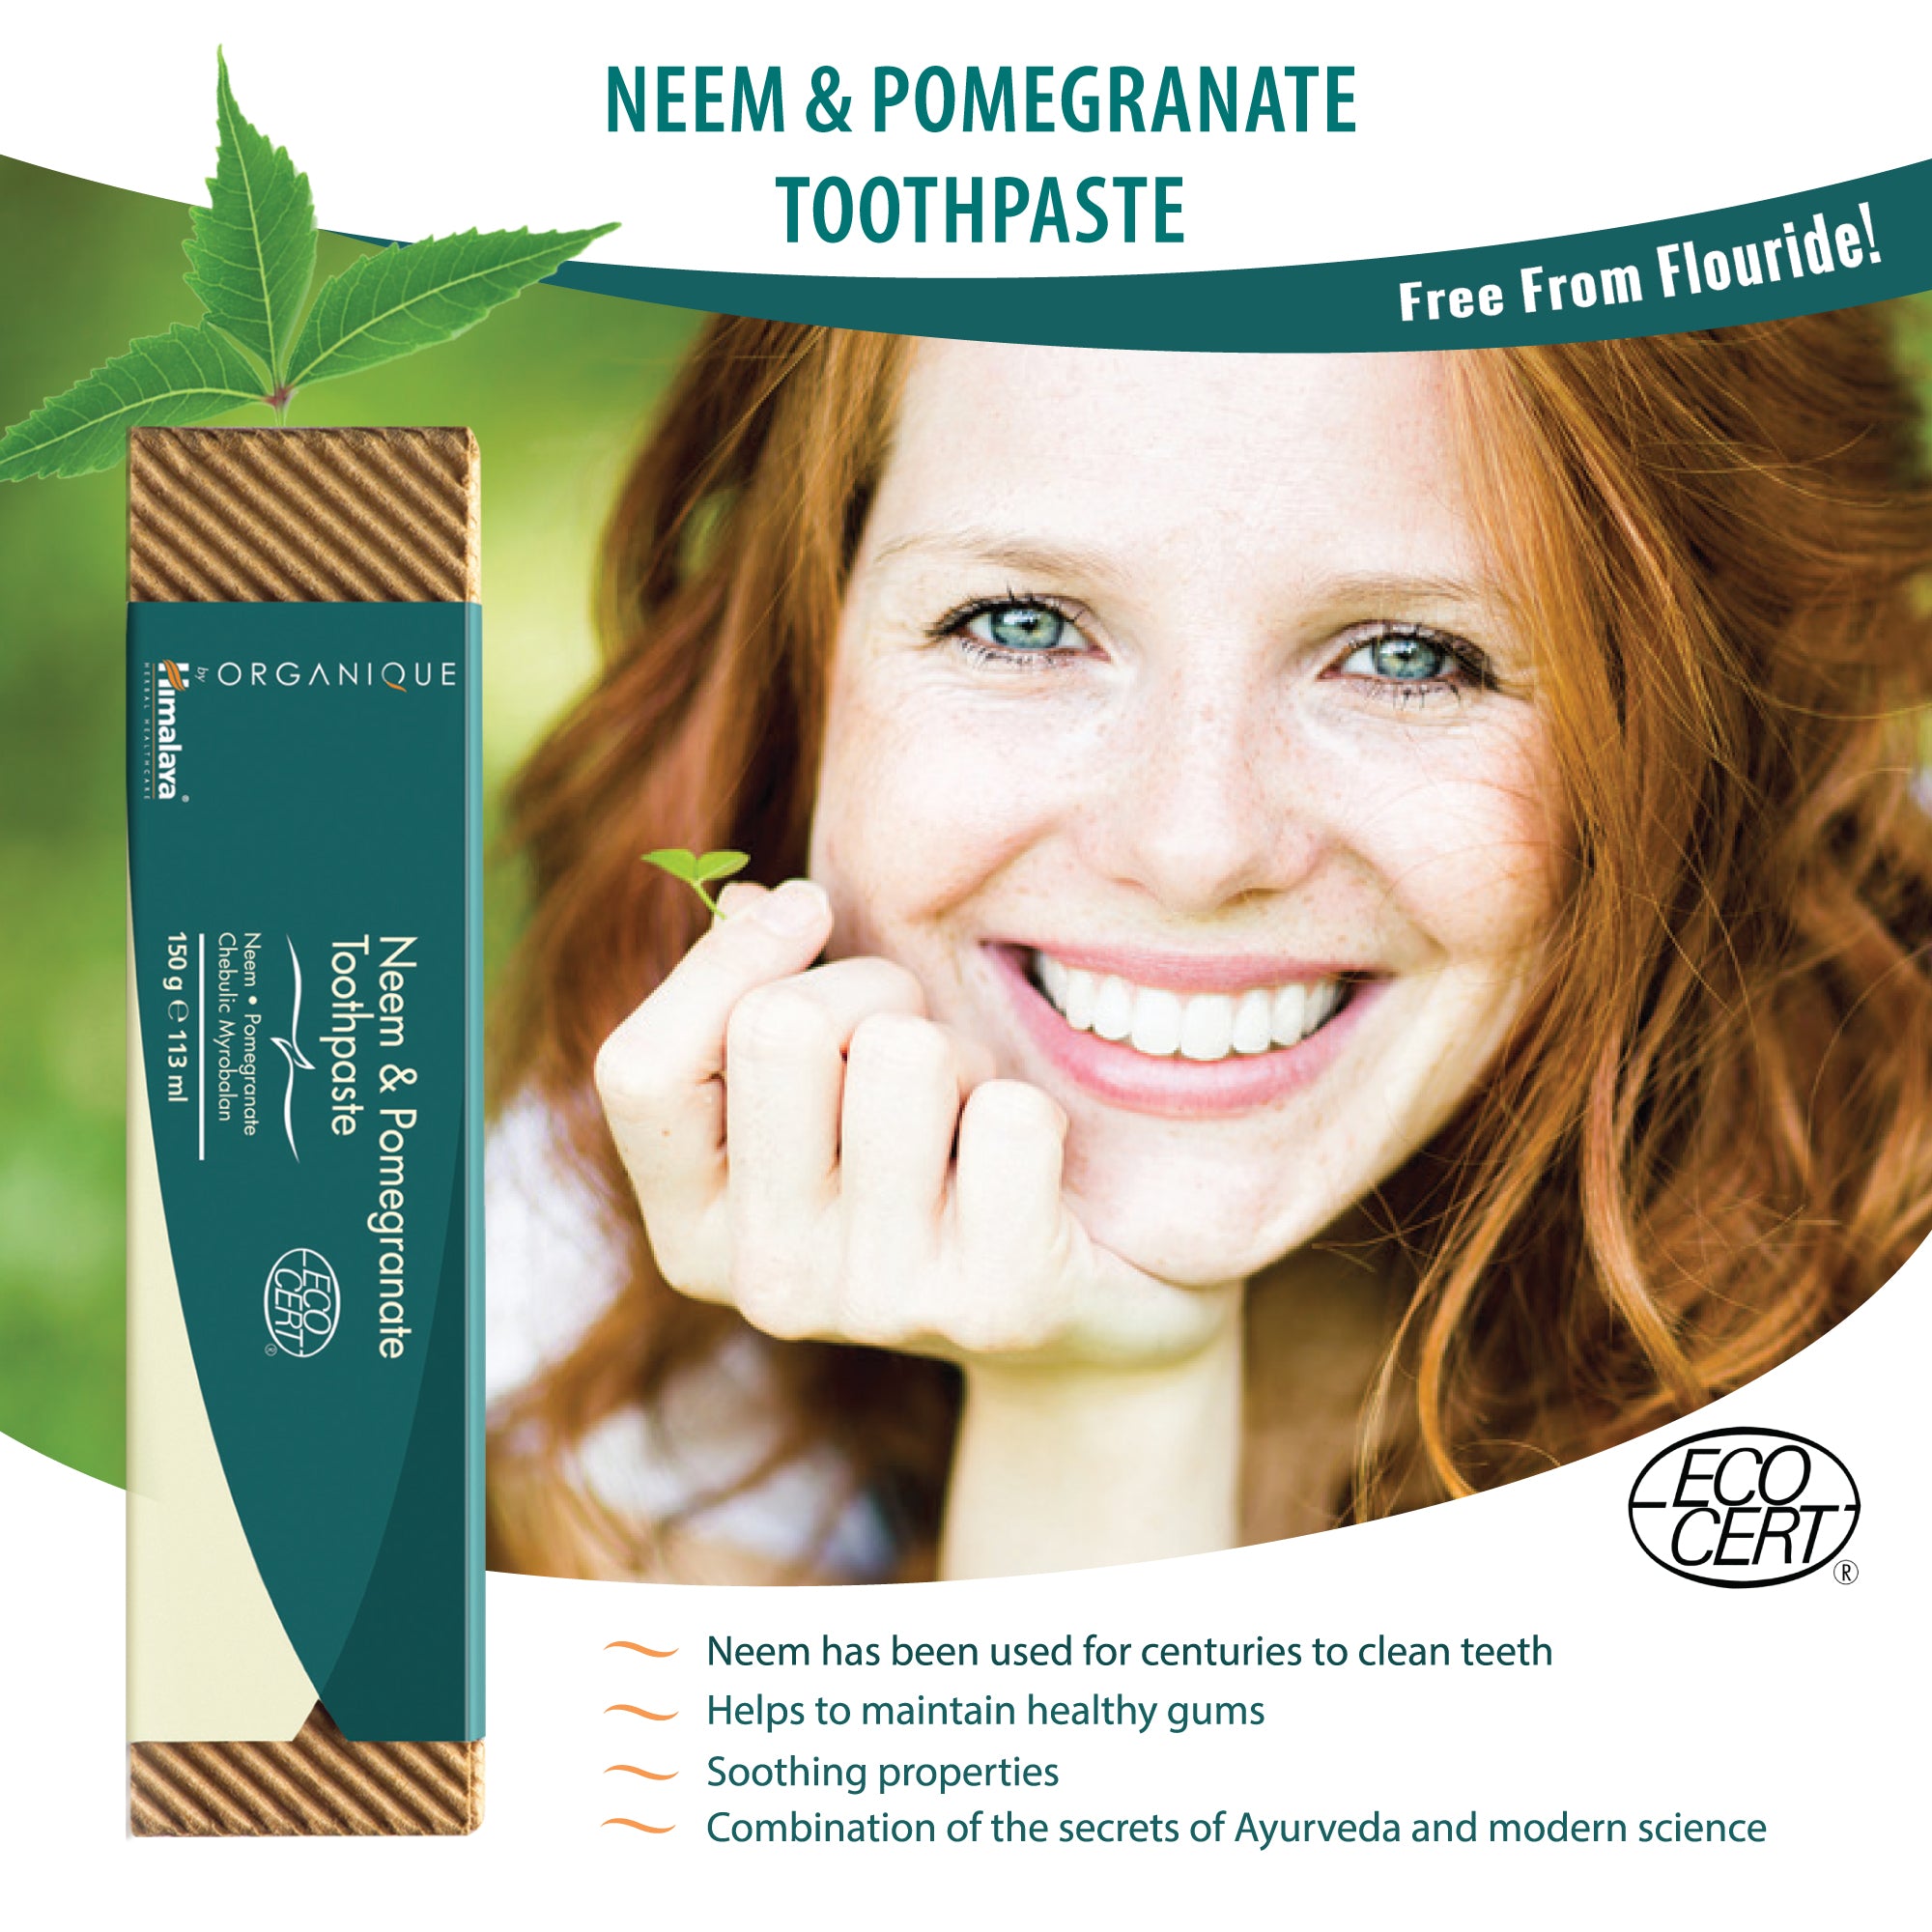 Himalaya ORGANIQUE Neem & Pomegranate Toothpaste - 150g (Pack of 3)